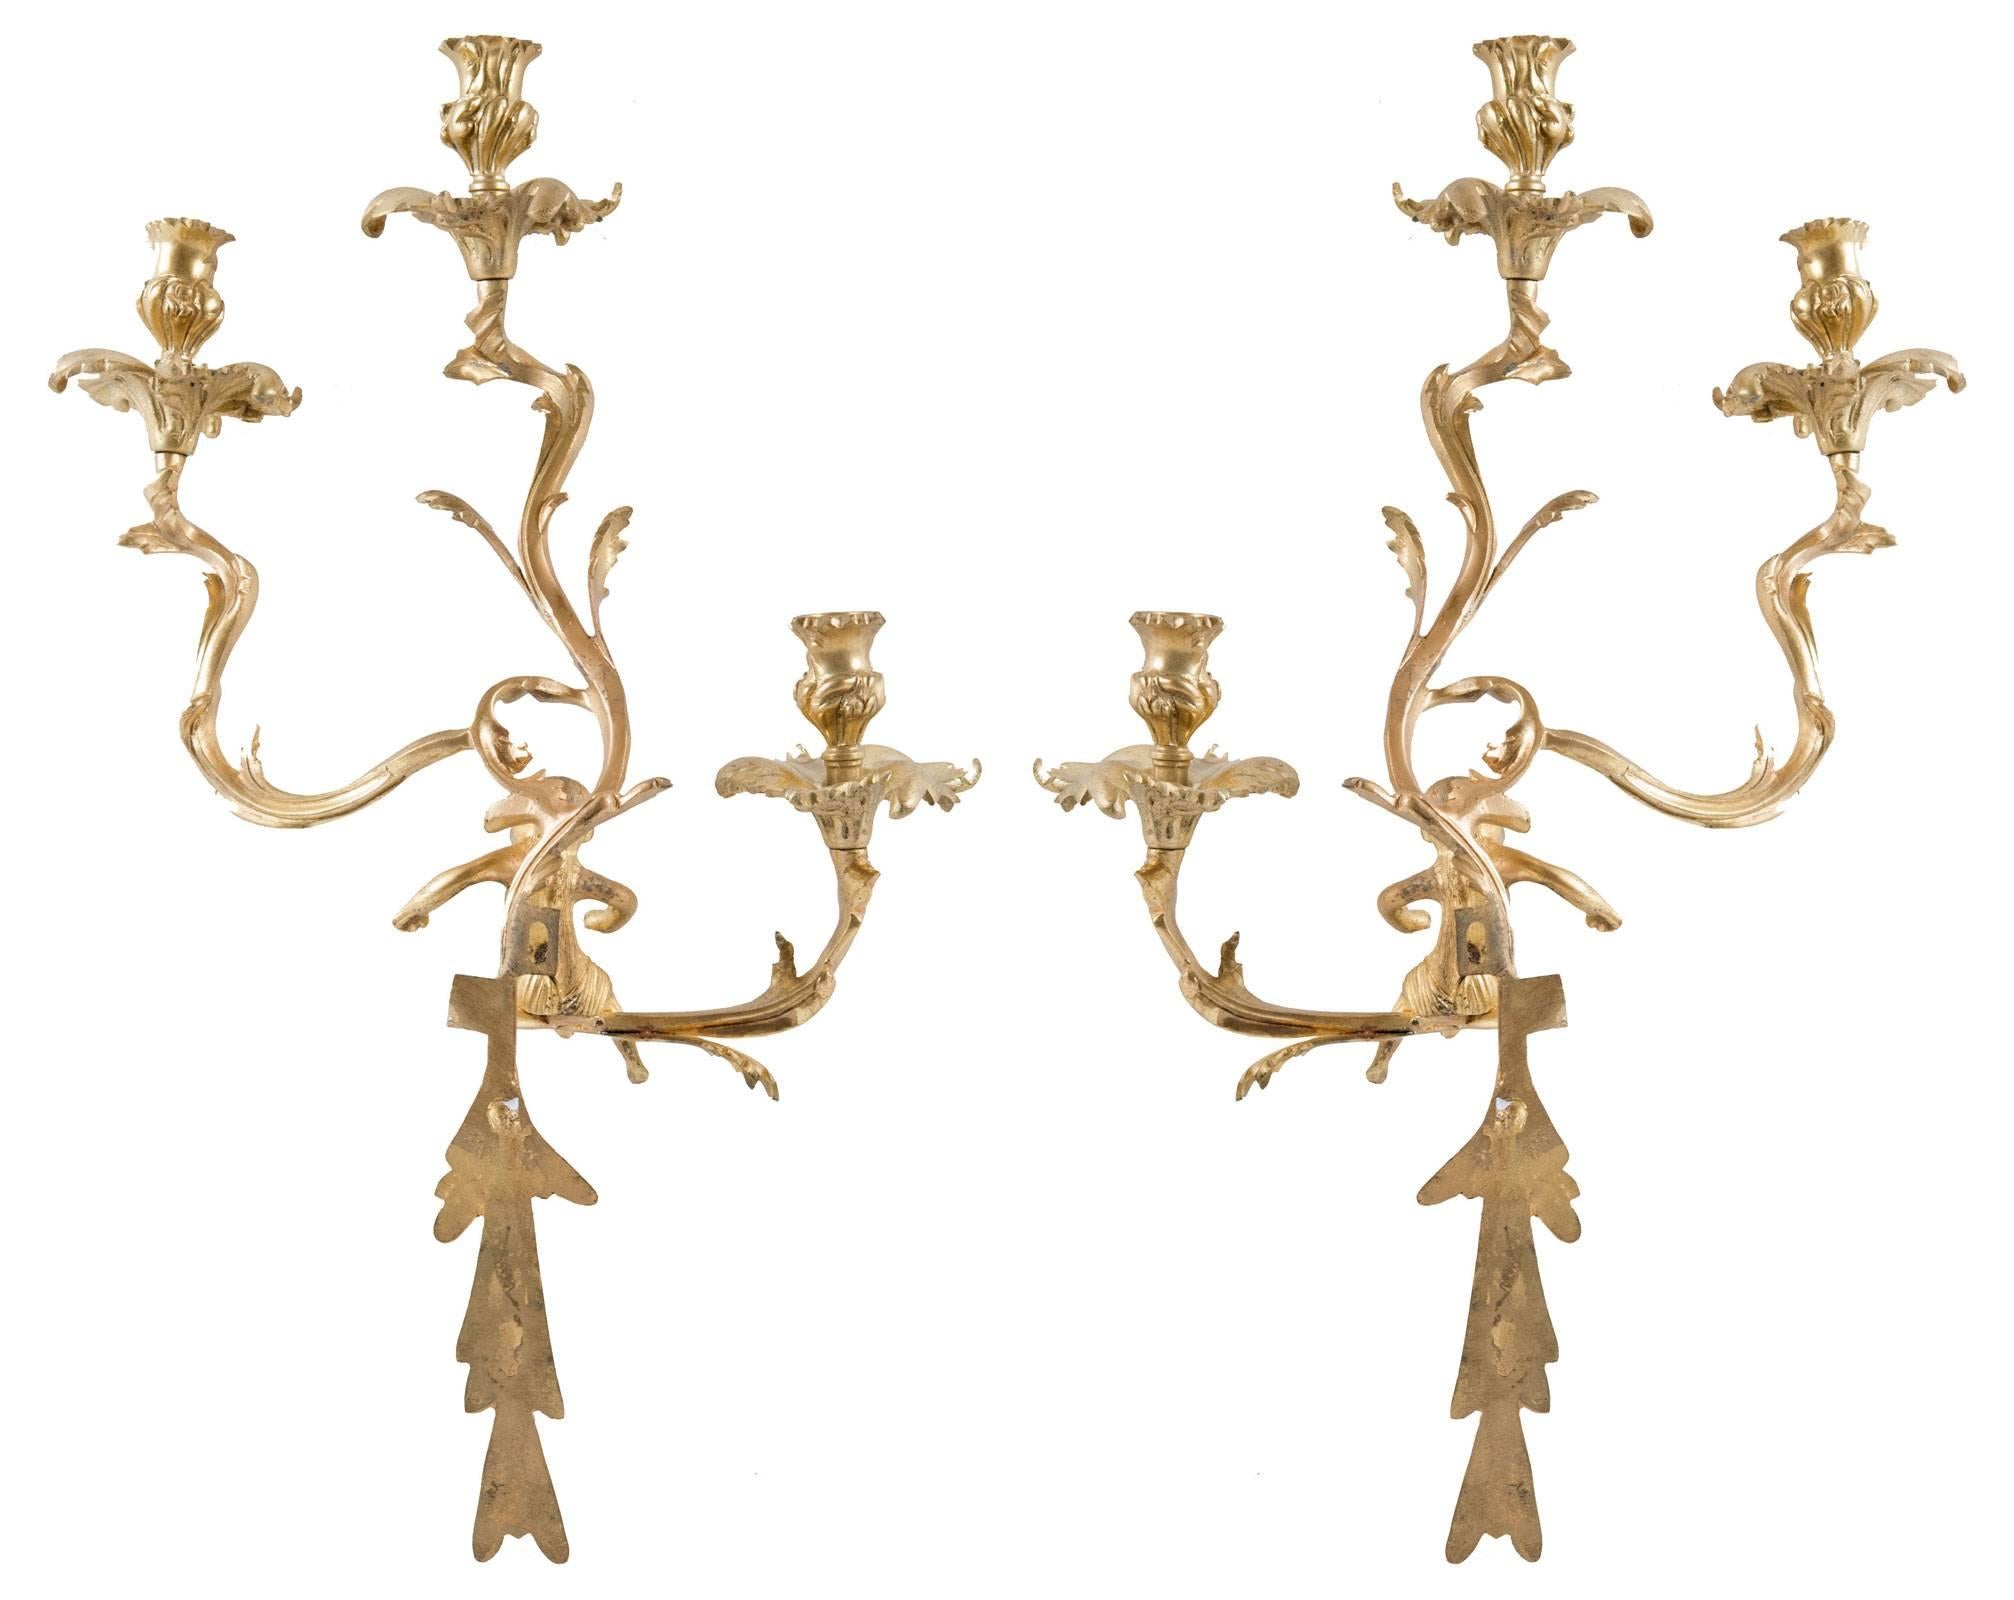 A pair of Louis XV-style gilt wall sconces with three scrolling foliate arms supporting thistle-form sockets, with chased hanging tendrils, and mounted with the figure of a centaur.